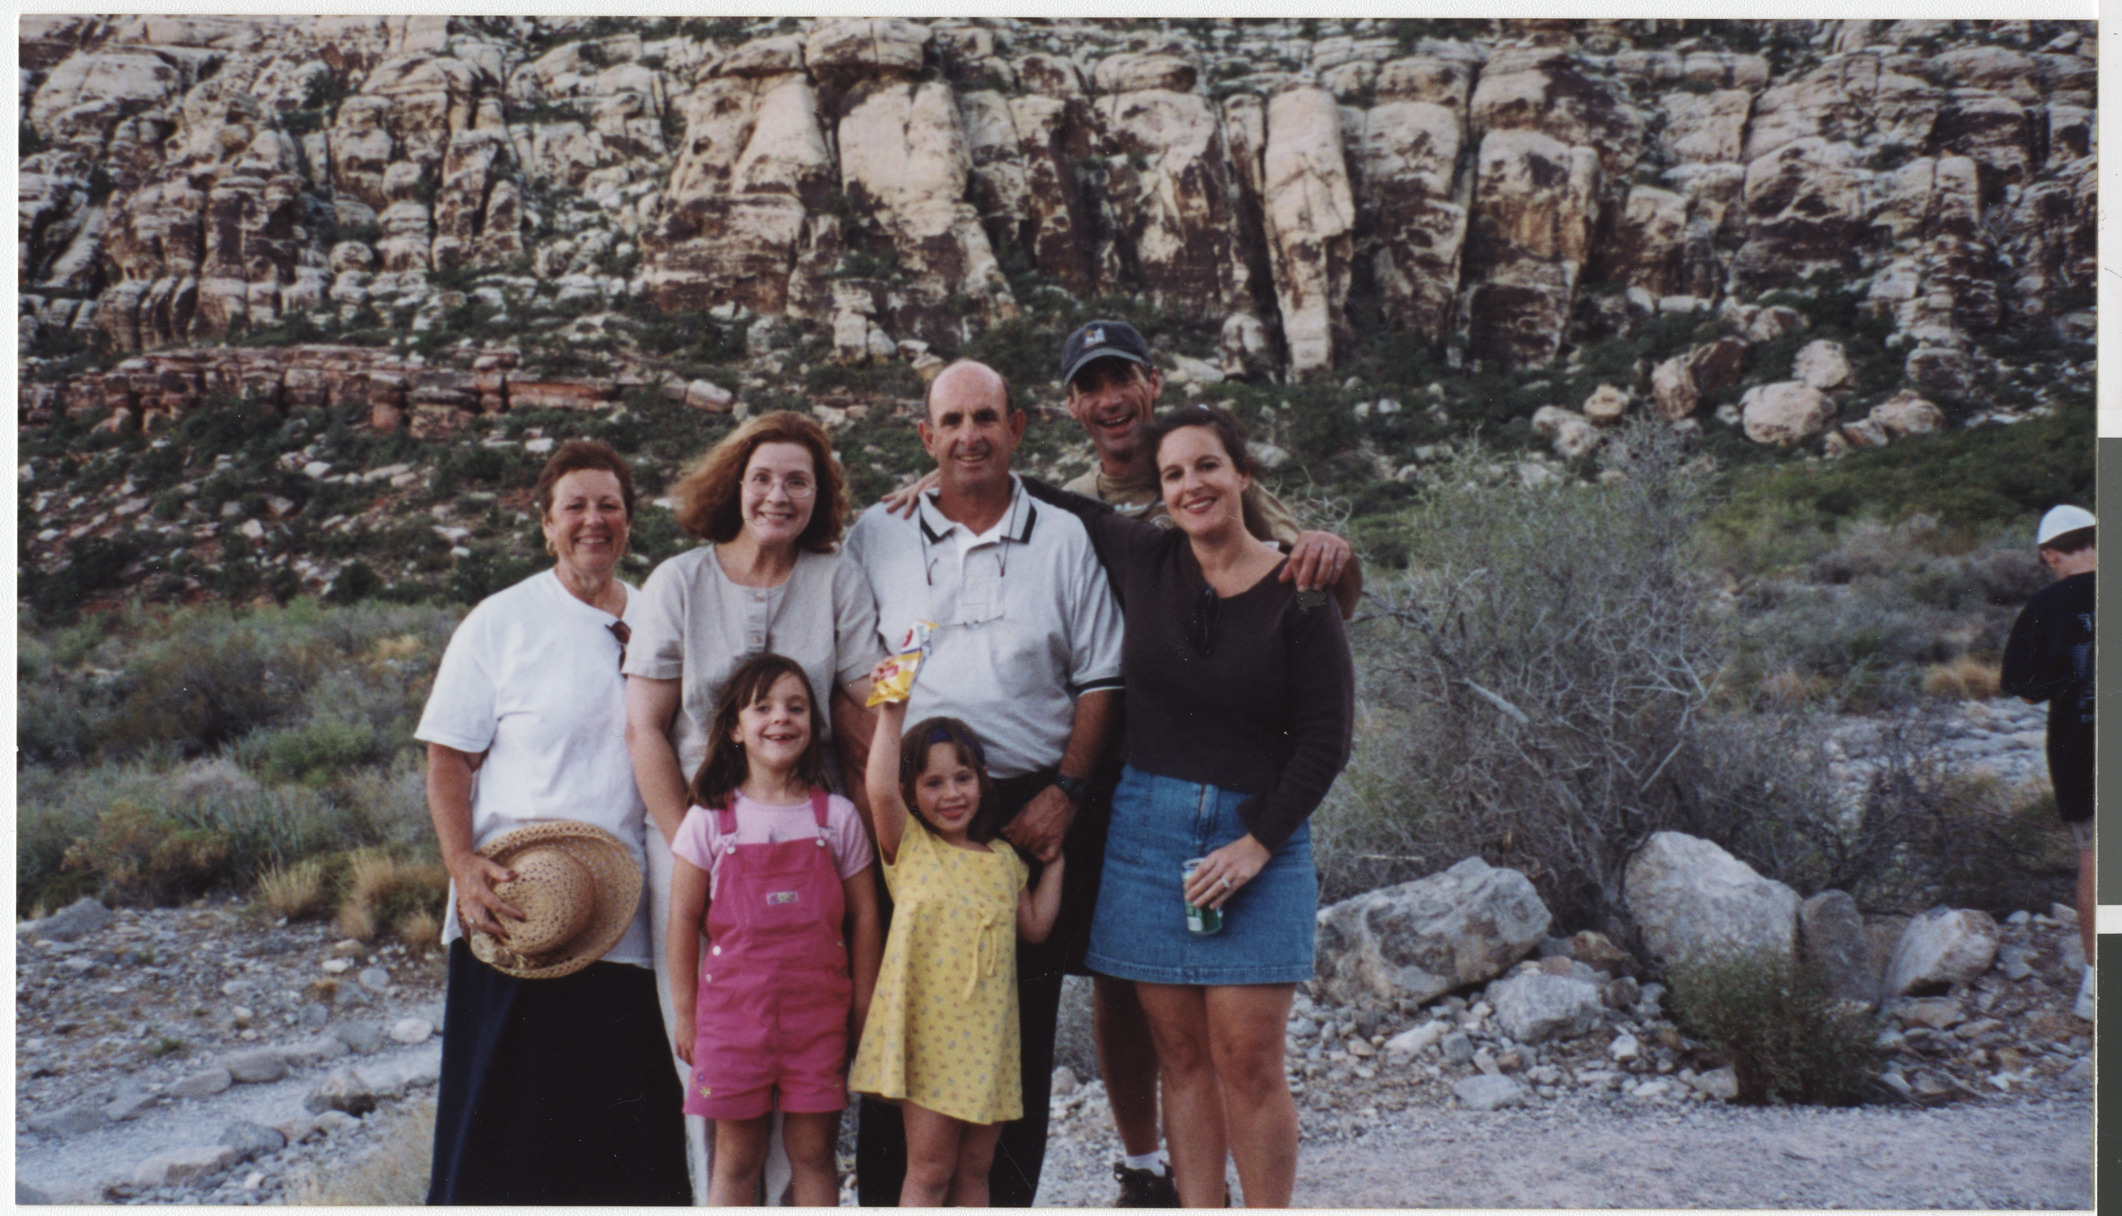 Photograph of group from Temple Beth Sholom at Red Rock, 2000